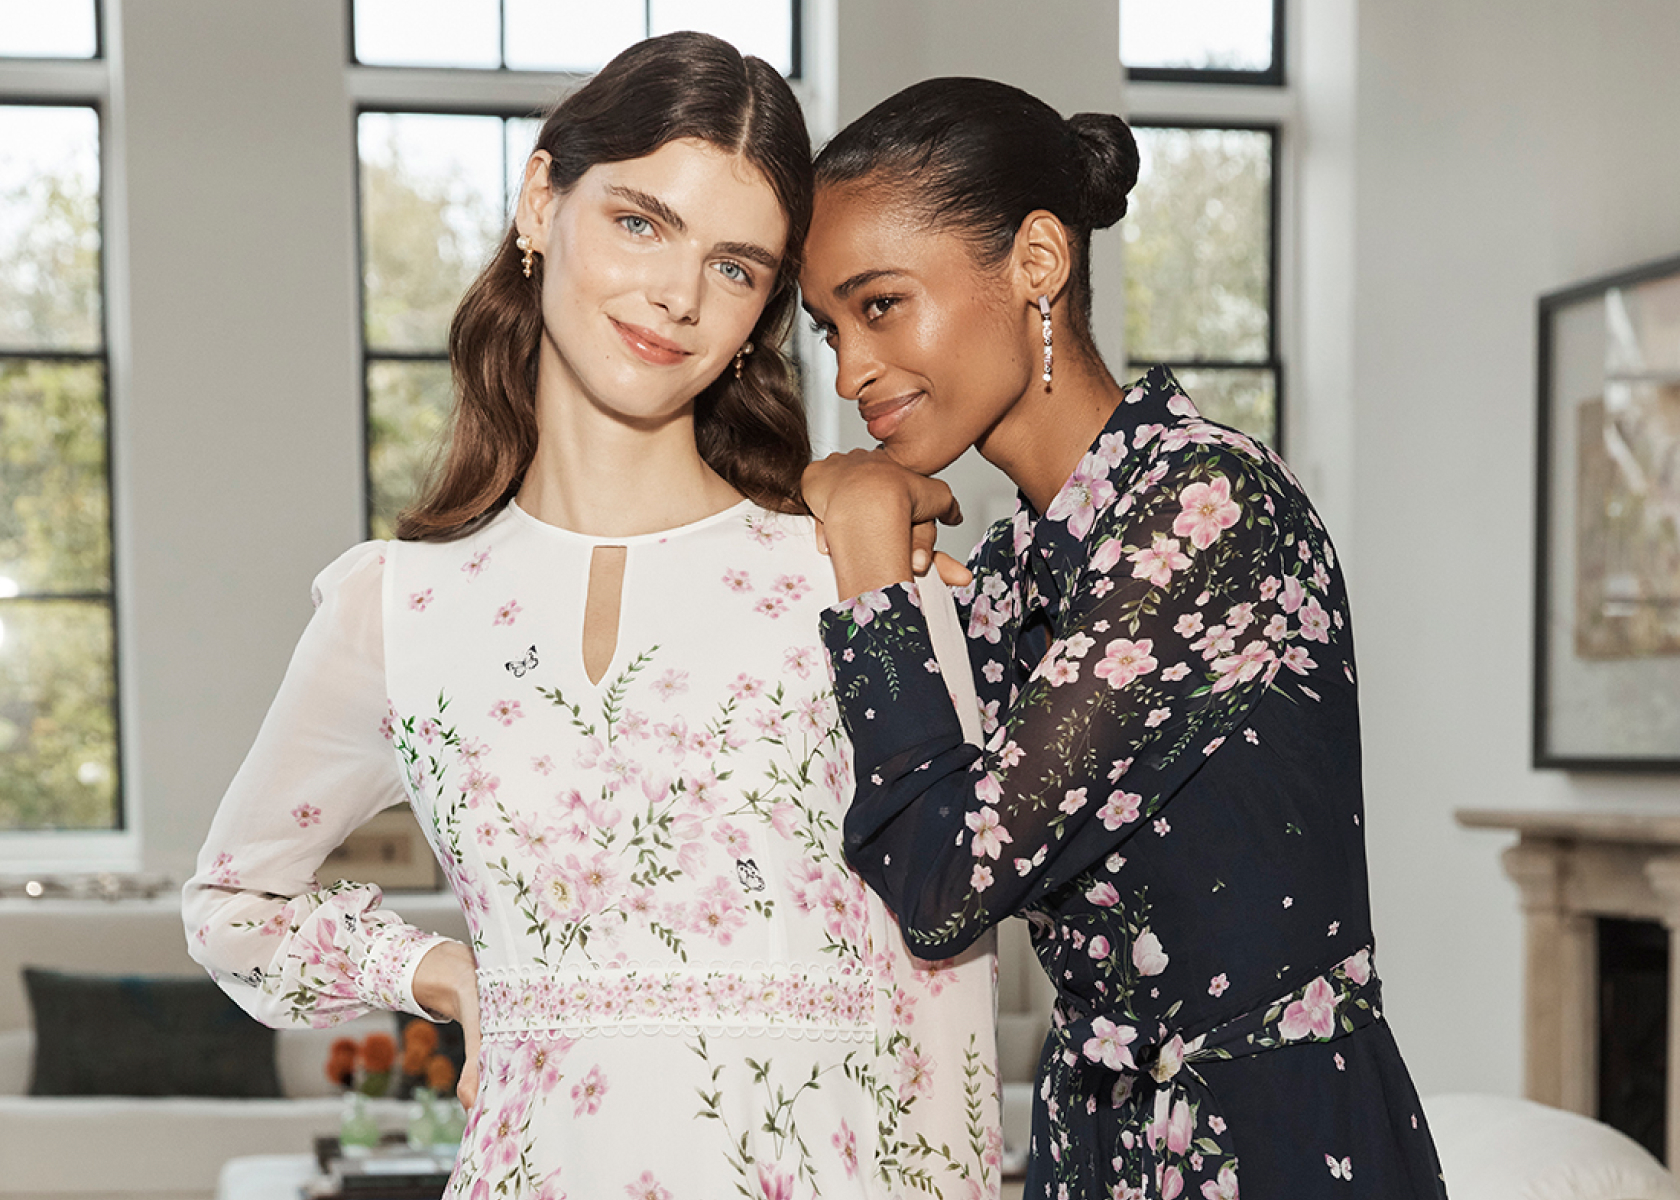 Hobbs models wearing floral print dresses and a blush pink dress.